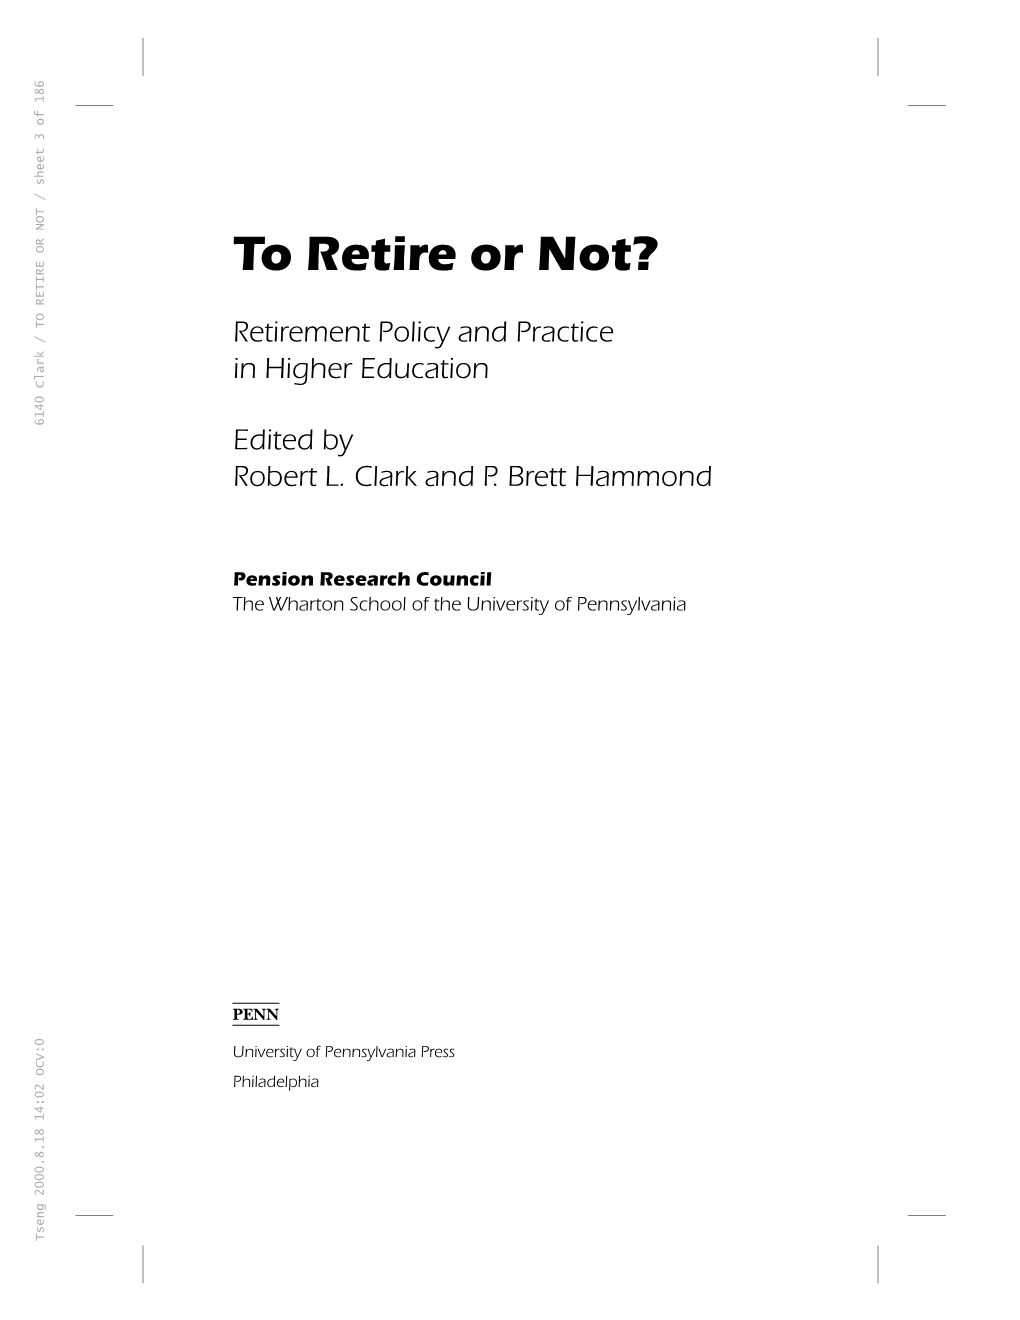 6140 Clark / to RETIRE OR NOT / Sheet 3 of 186 Edited by Robert L